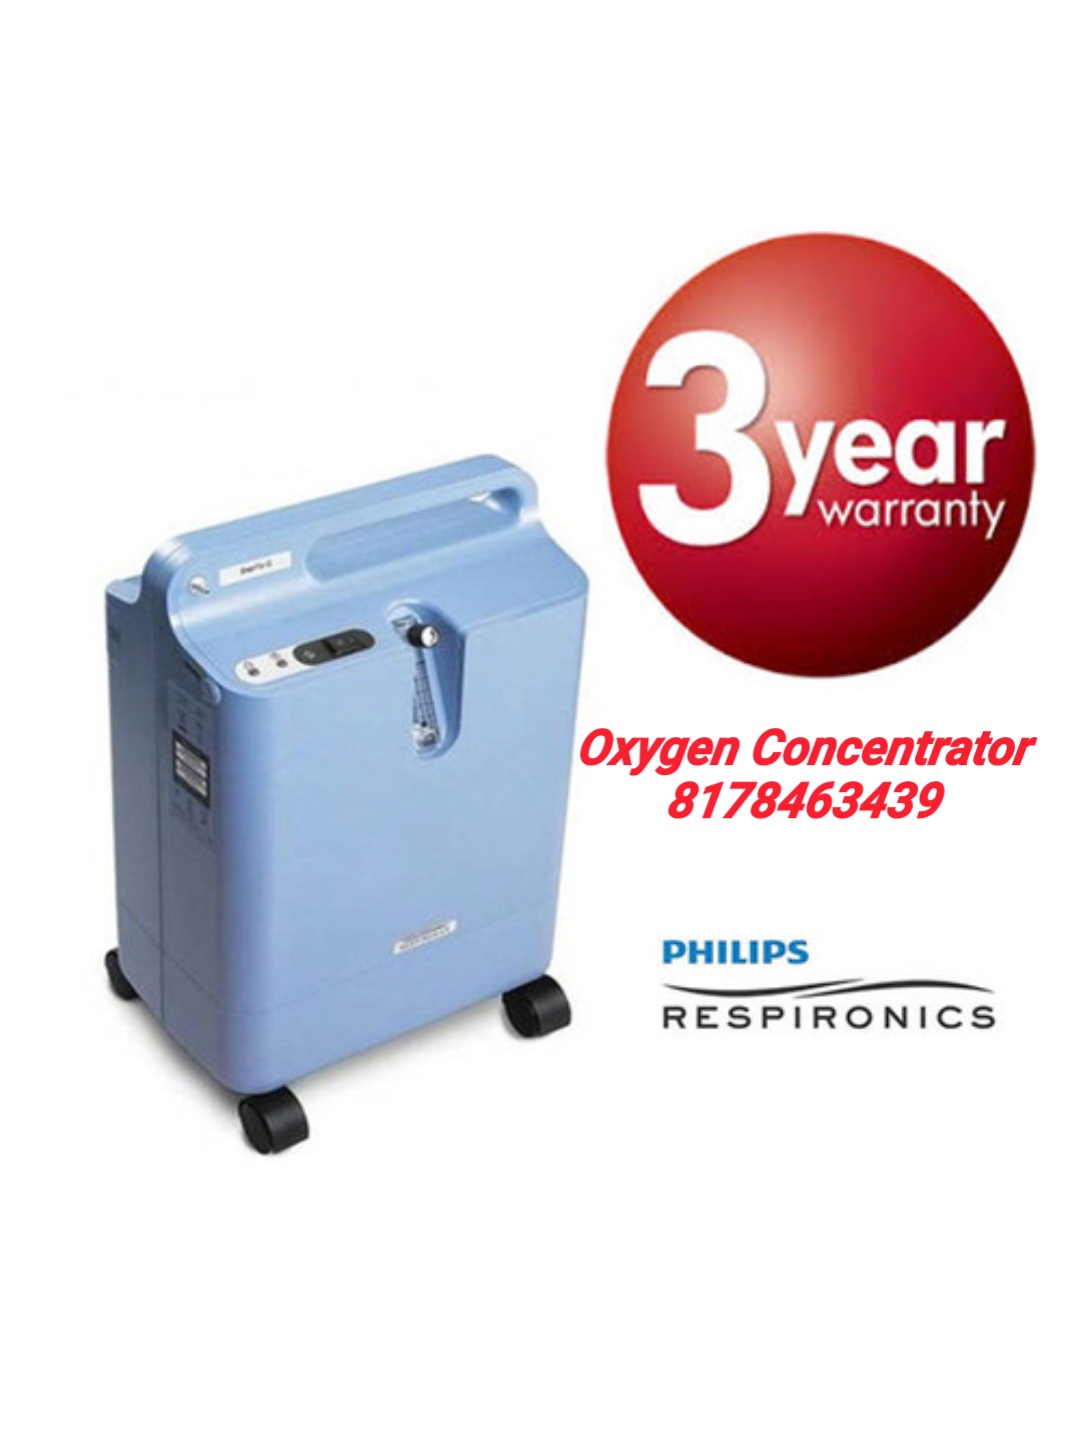 SALE OXYGEN MACHINE SELL OXYGEN CONCENTRATOR 8178463439